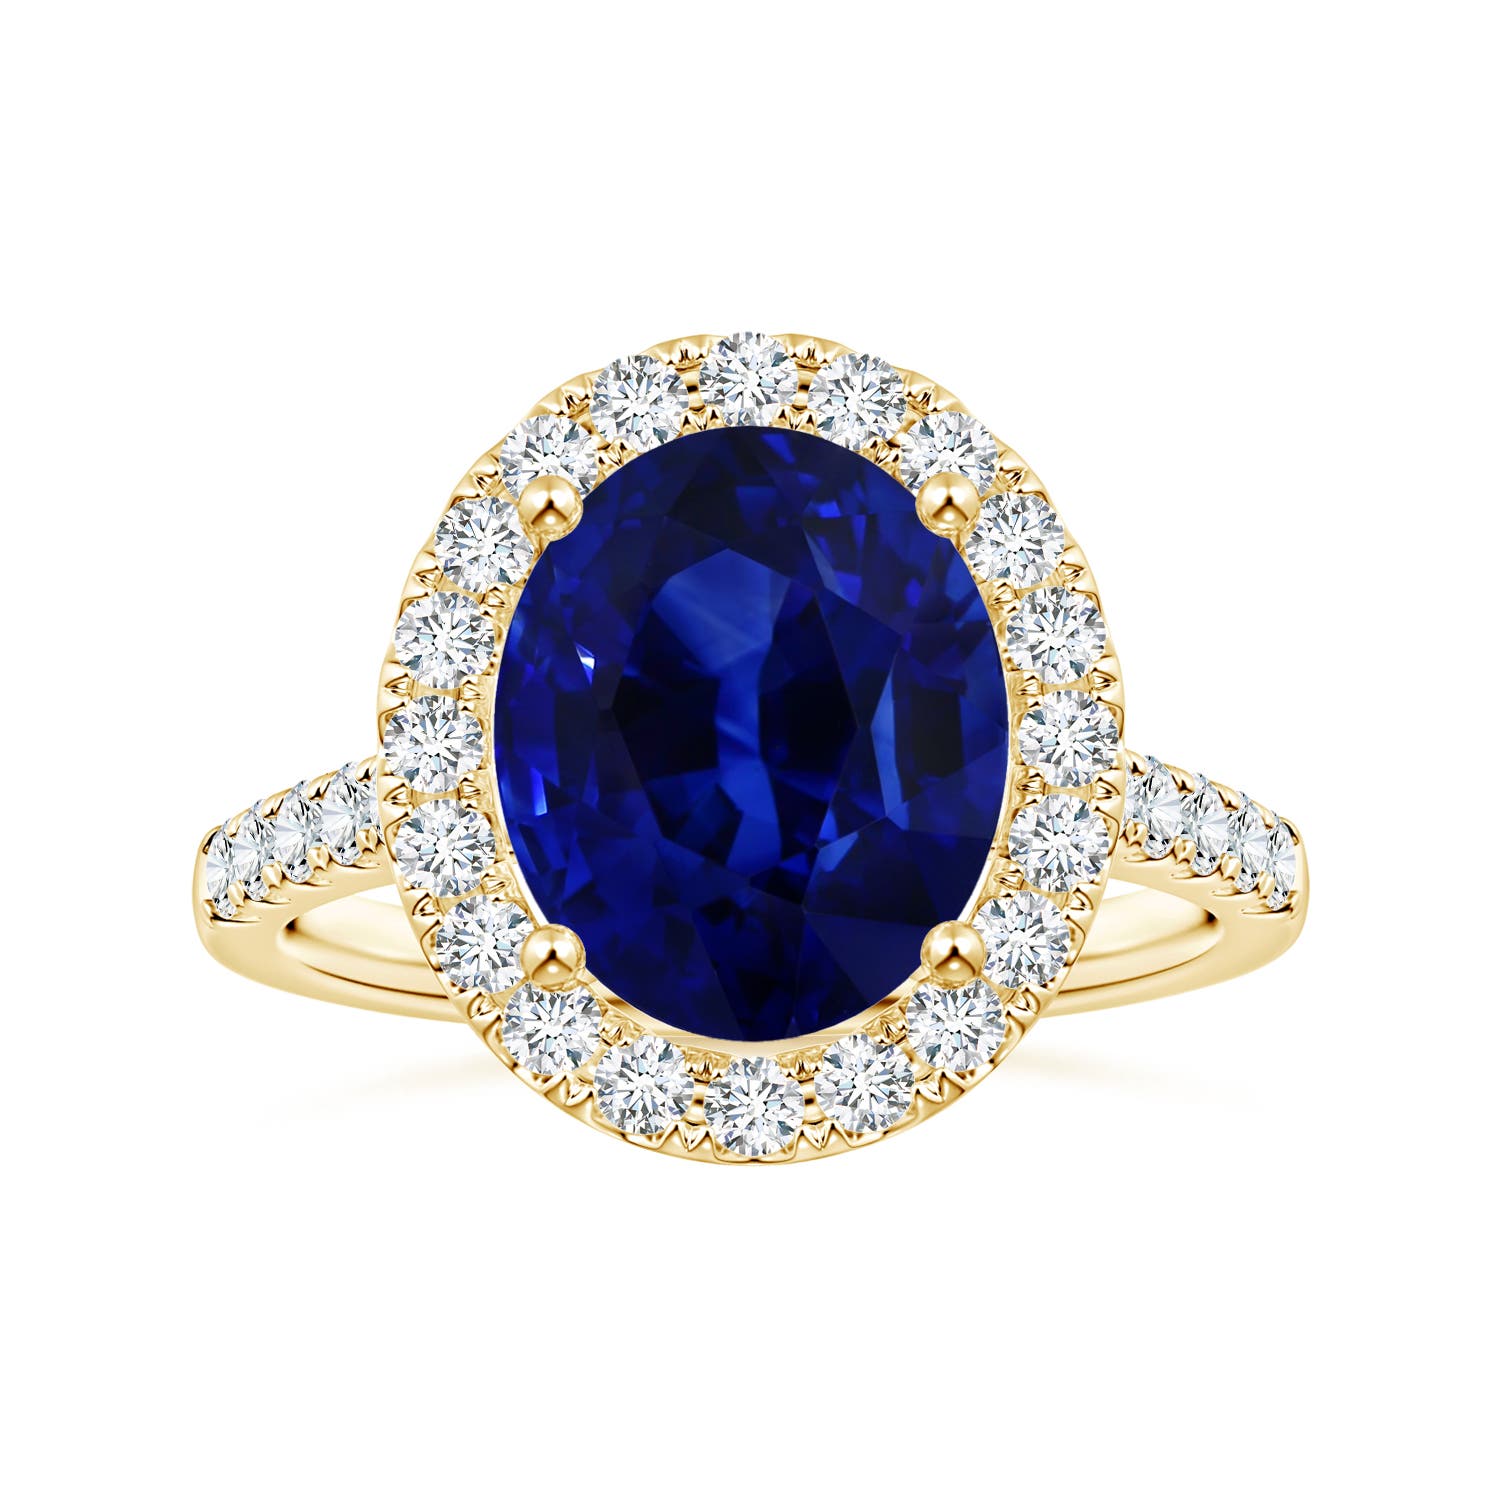 Cushion Cut Ceylon Sapphire and Diamond Halo Engagement Ring with Matching  Contoured Diamond Wedding Band in 14k (GR-5882)